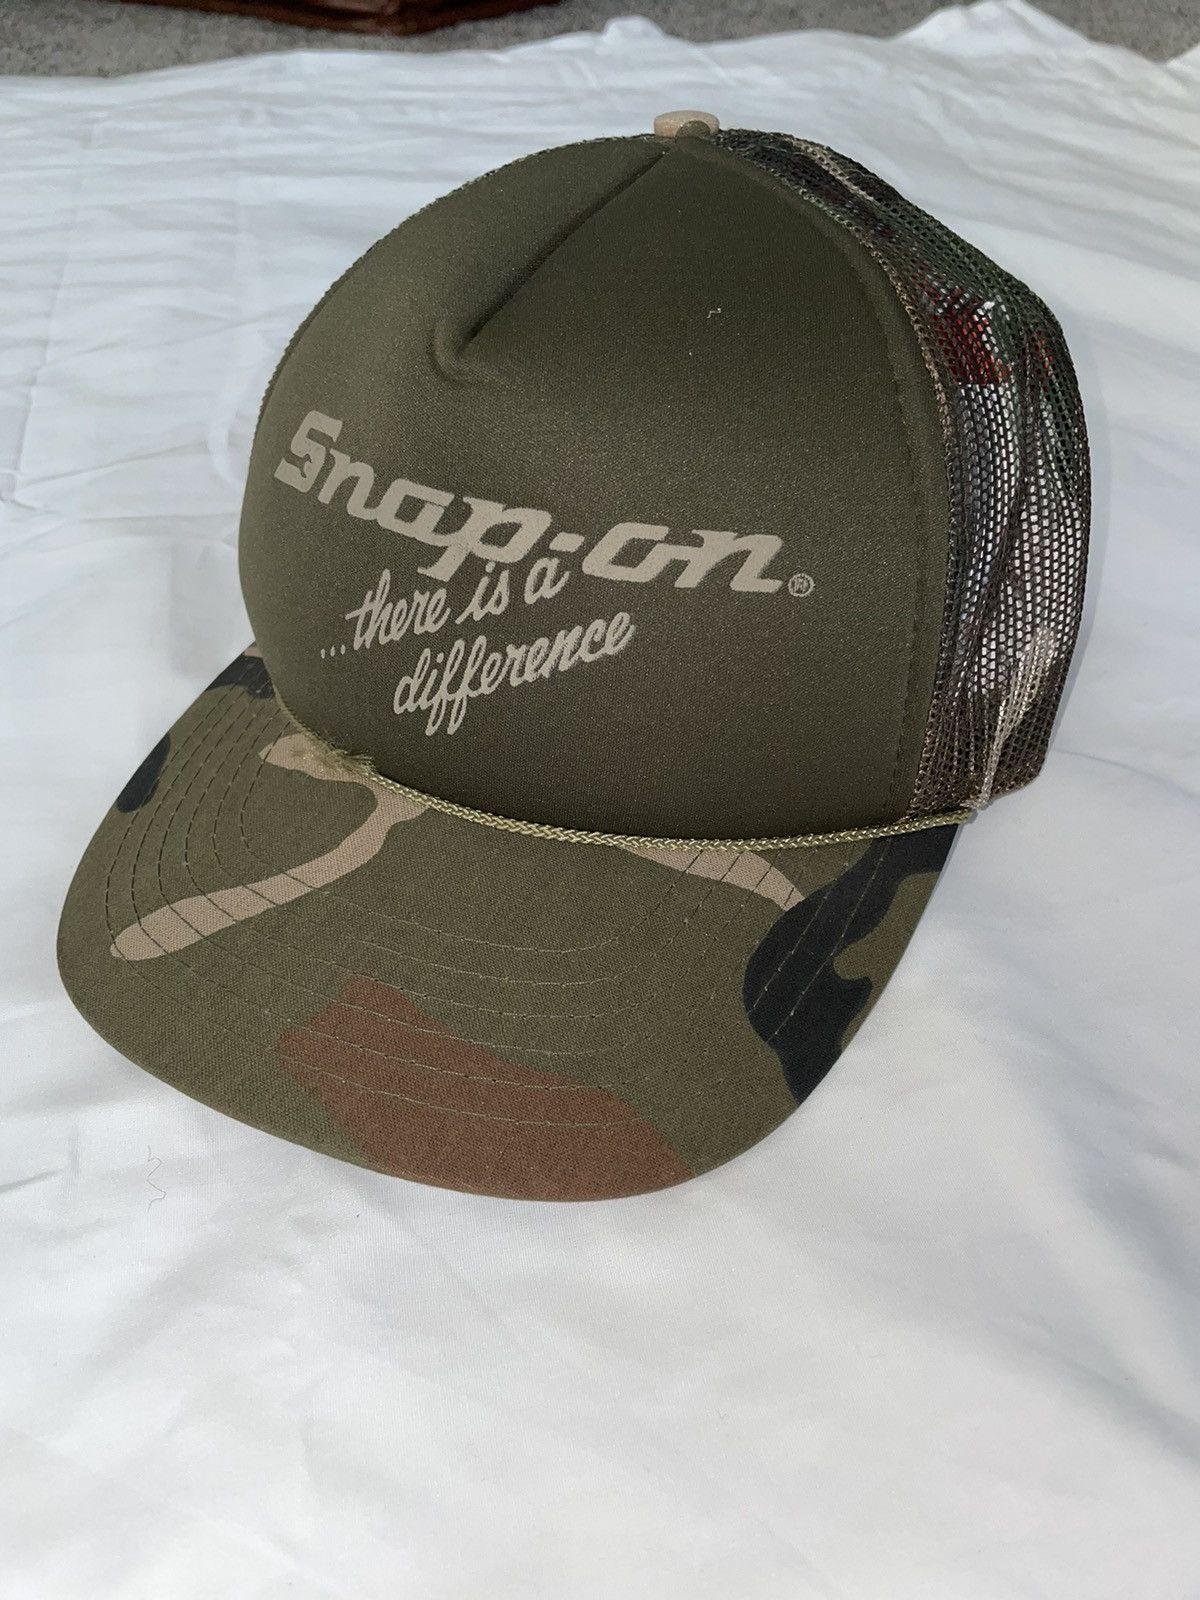 Vintage Vintage Snap On Trucker Hat Size ONE SIZE - 2 Preview